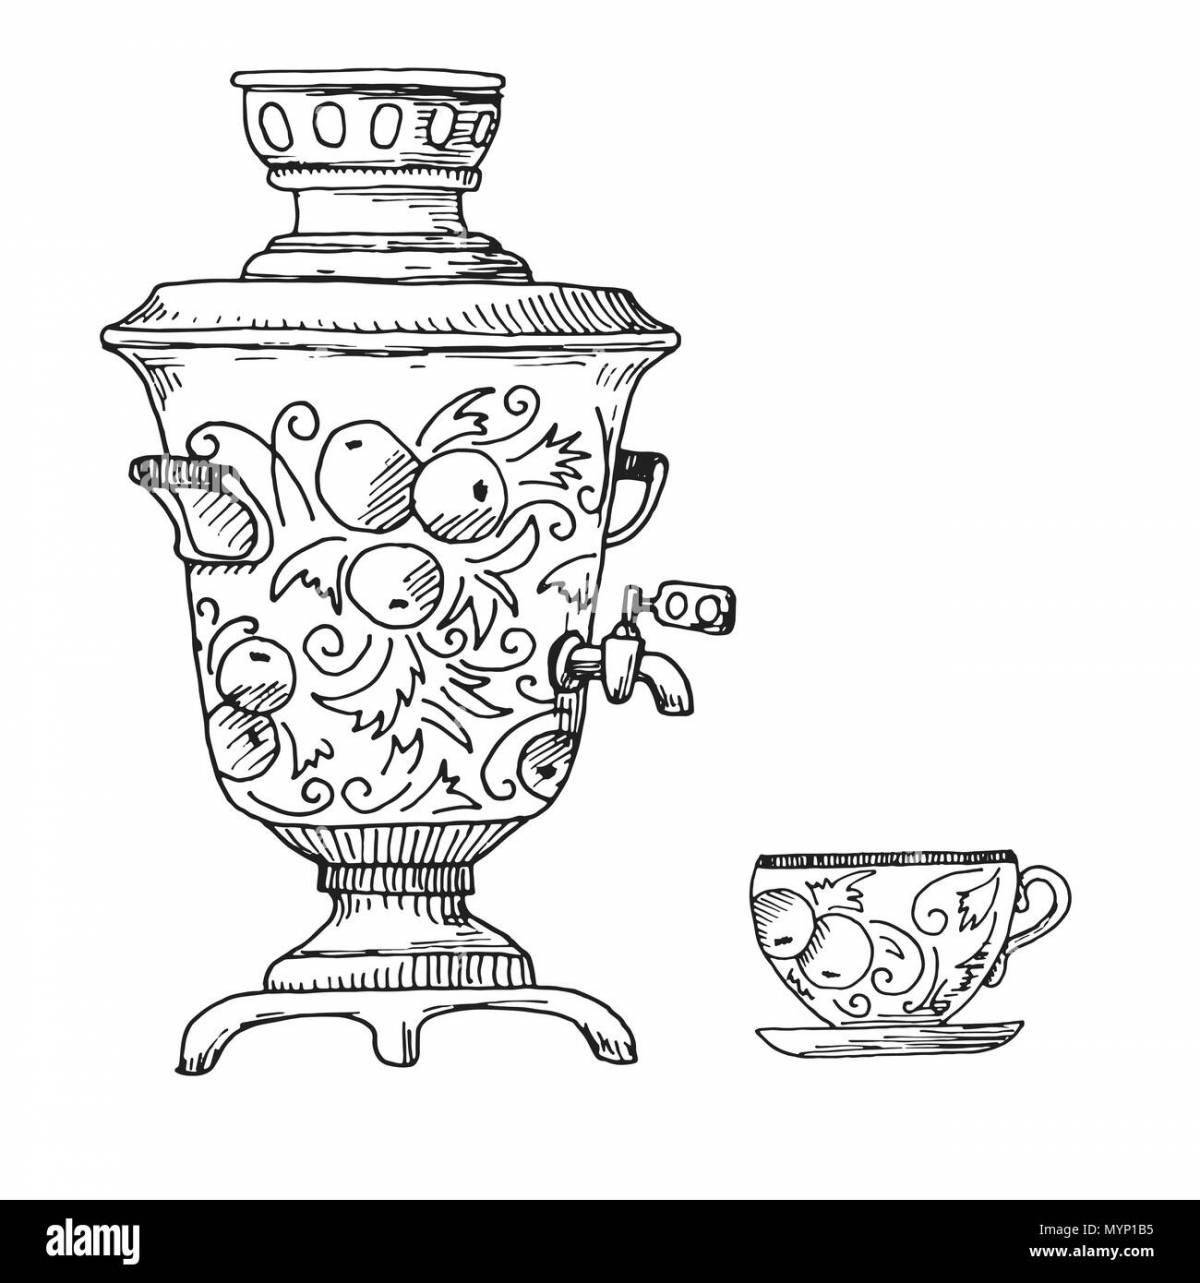 Fun coloring book samovar for kids 3-4 years old